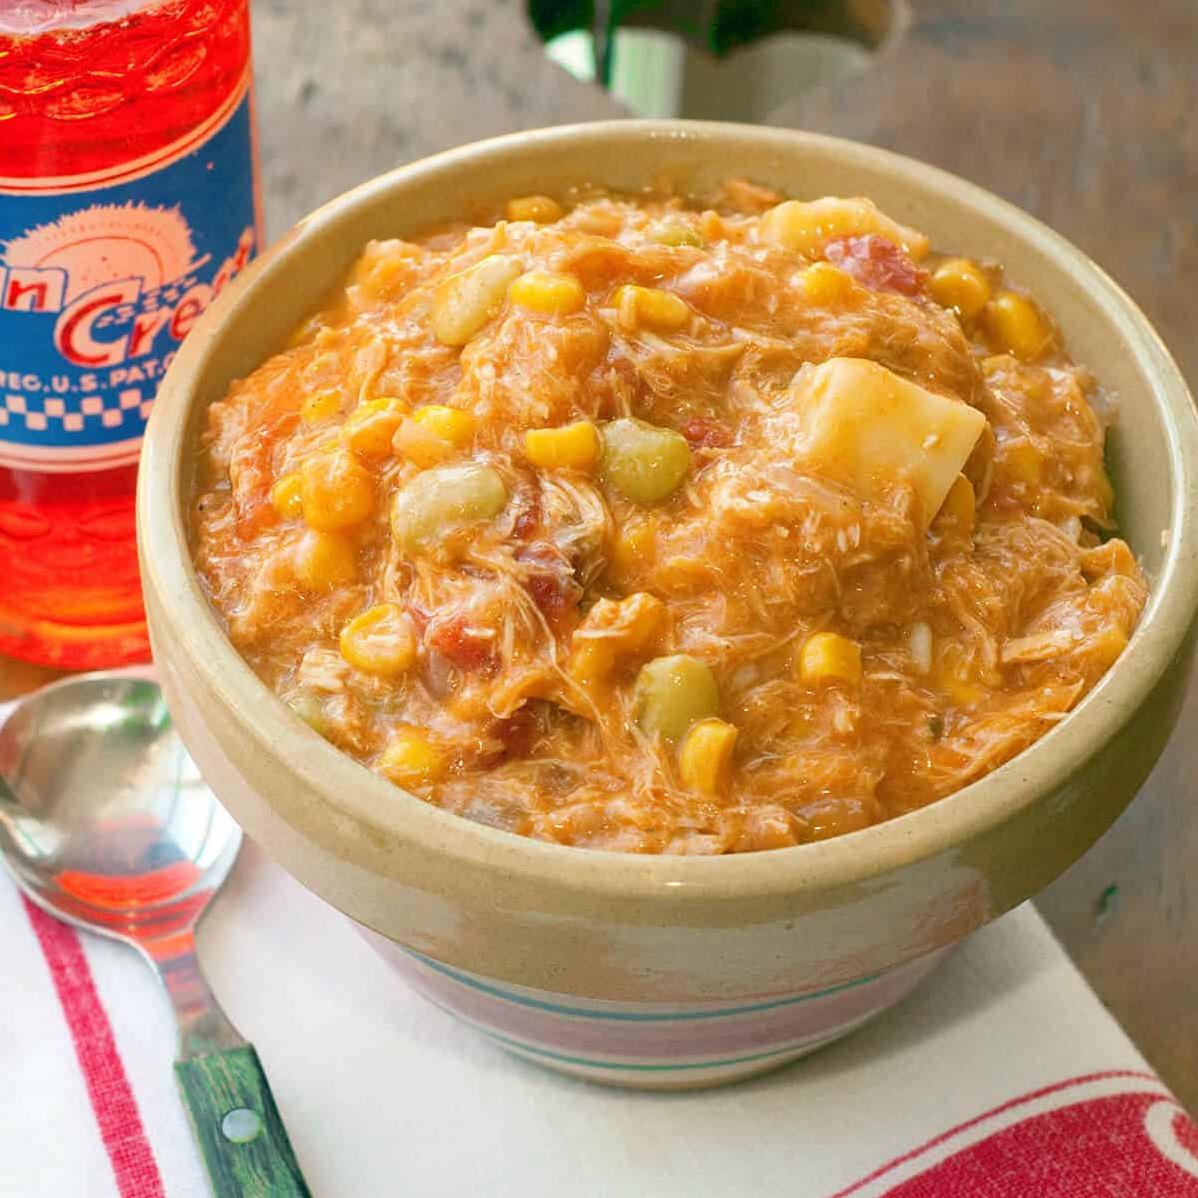  Nothing beats a hot and savory Brunswick Stew that’s packed with flavors and goodness!